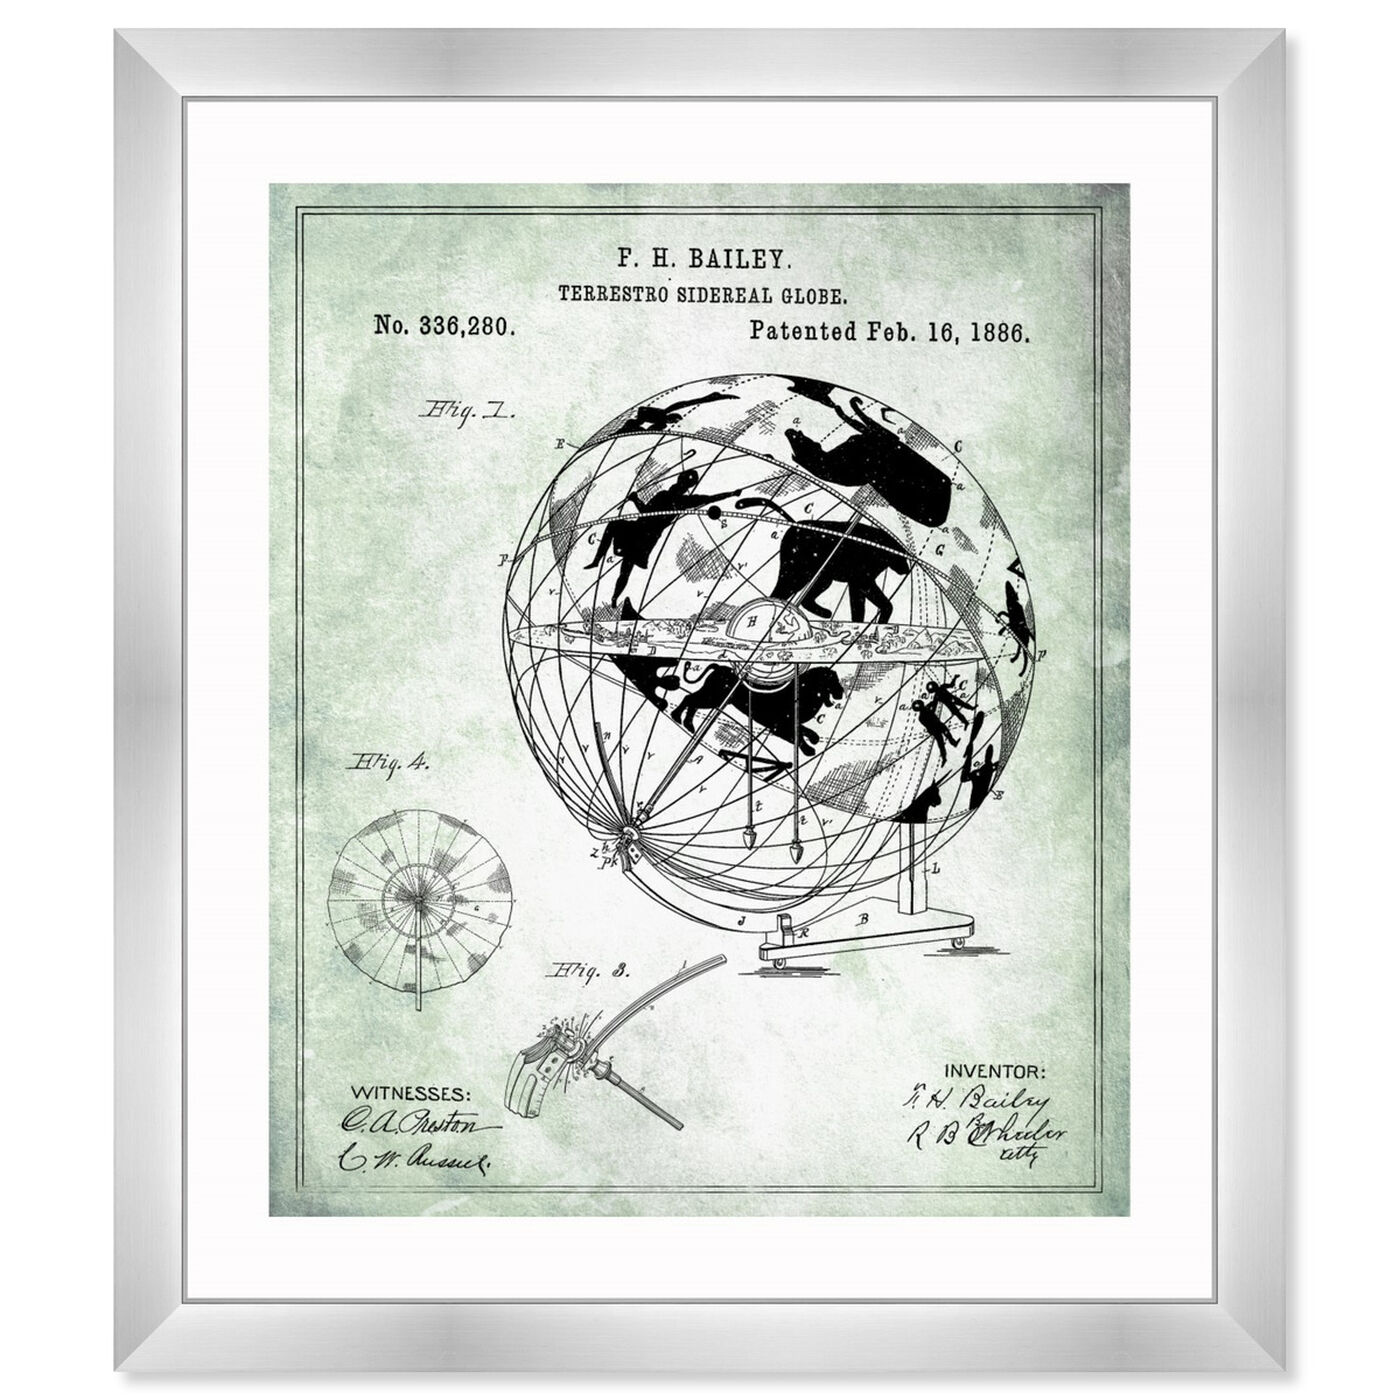 Front view of Terrestro Sidereal Globe 1886 featuring world and countries and international art.